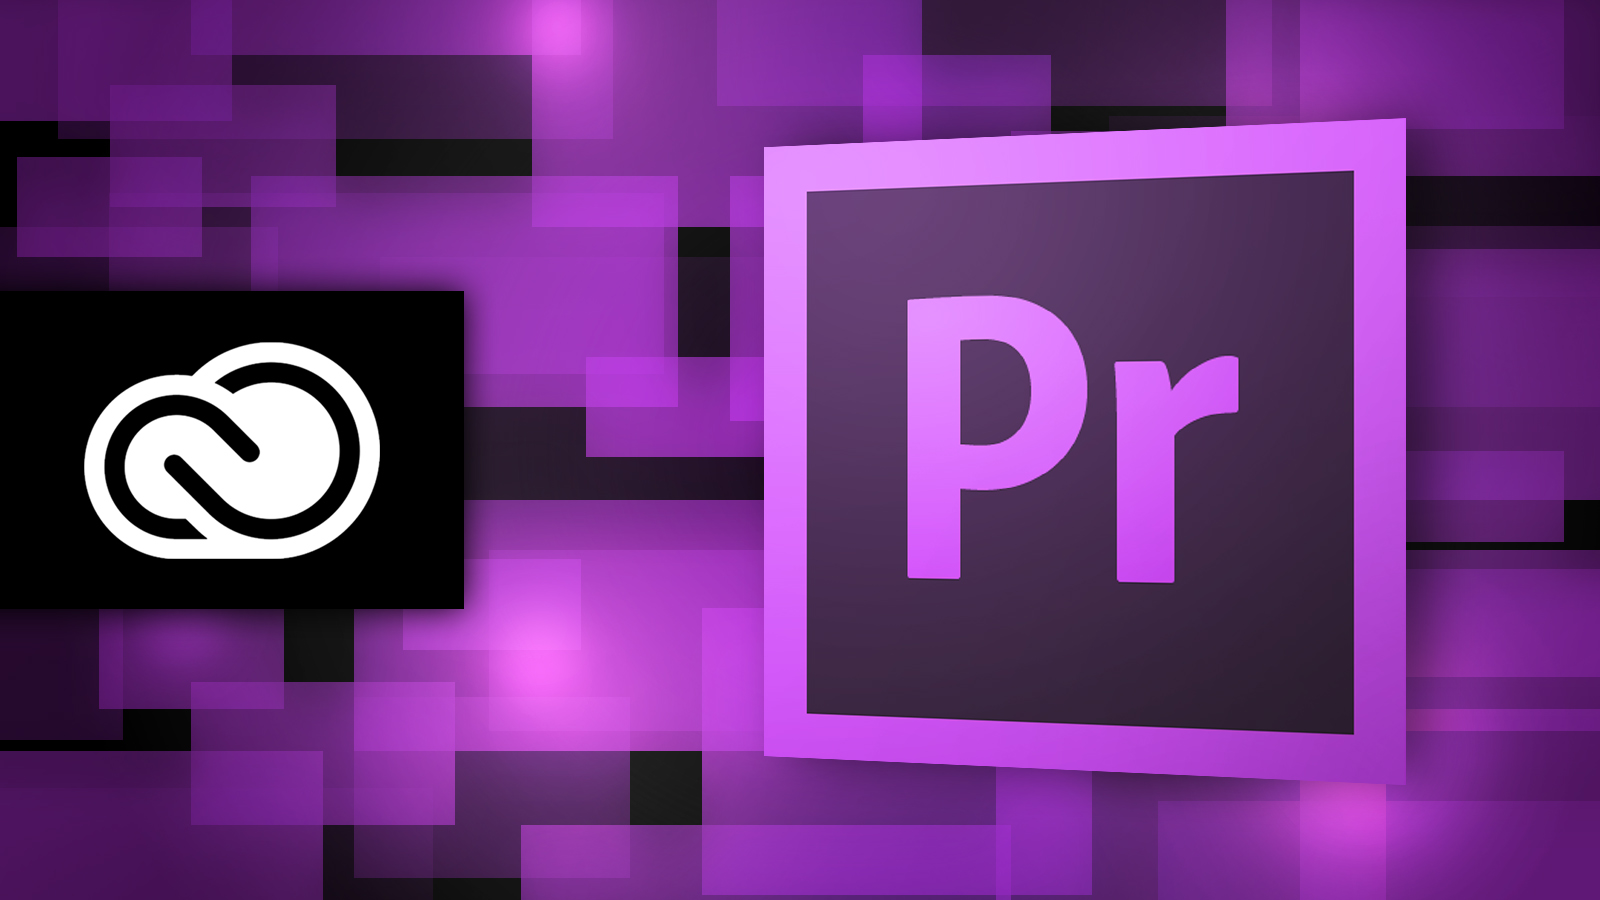 FMC Training Provides Excellent Online And In-Person Training For Learning Adobe Premiere Pro